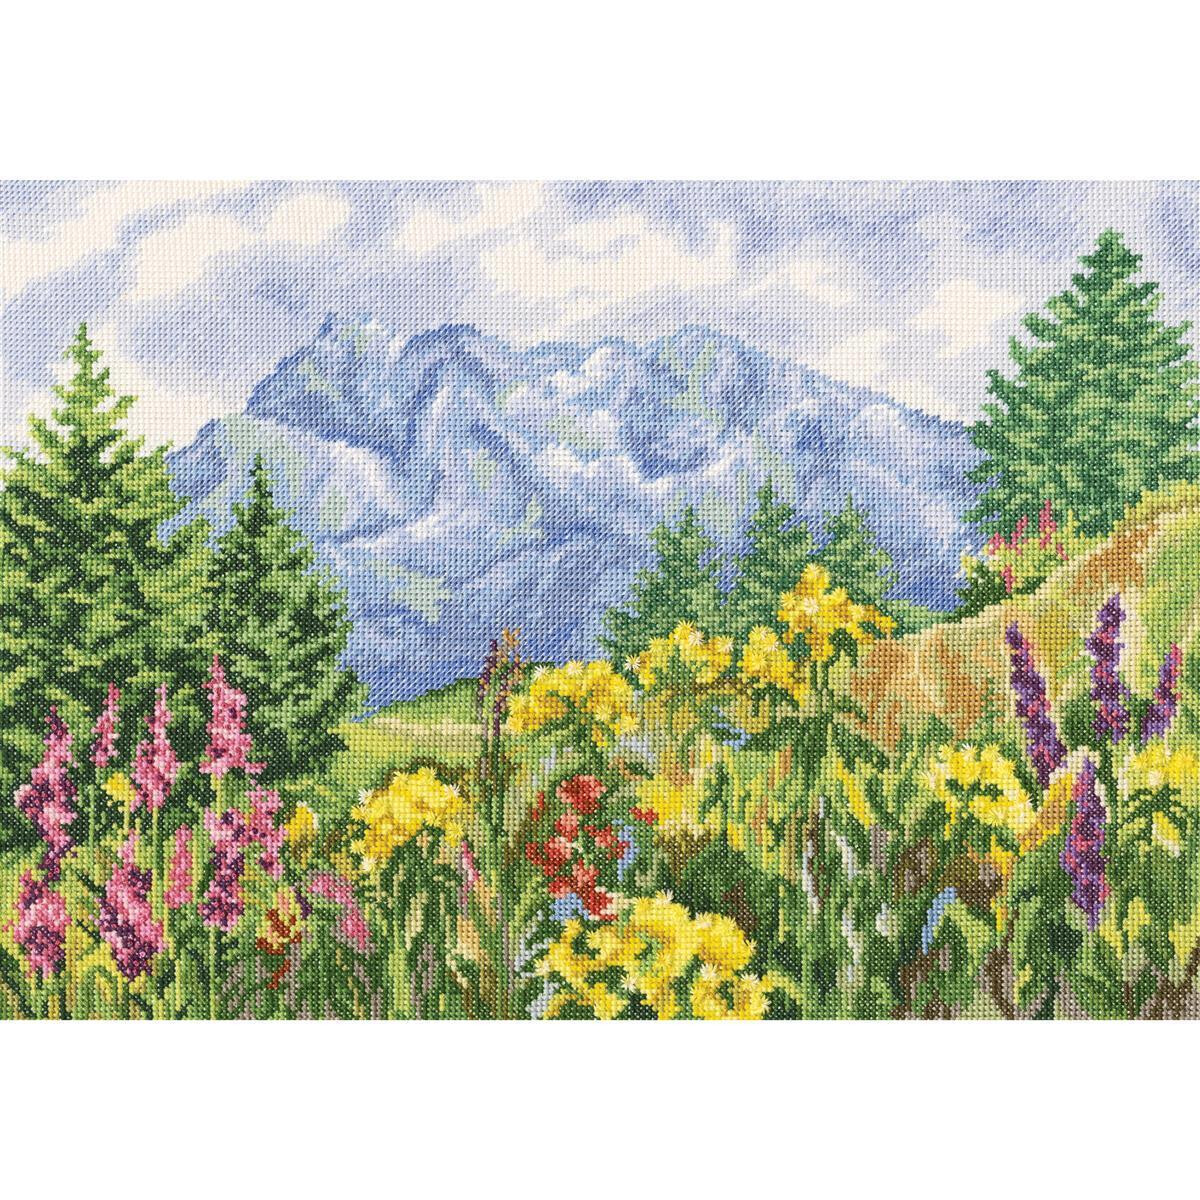 RTO counted Cross Stitch Kit "Mountain meadow"...